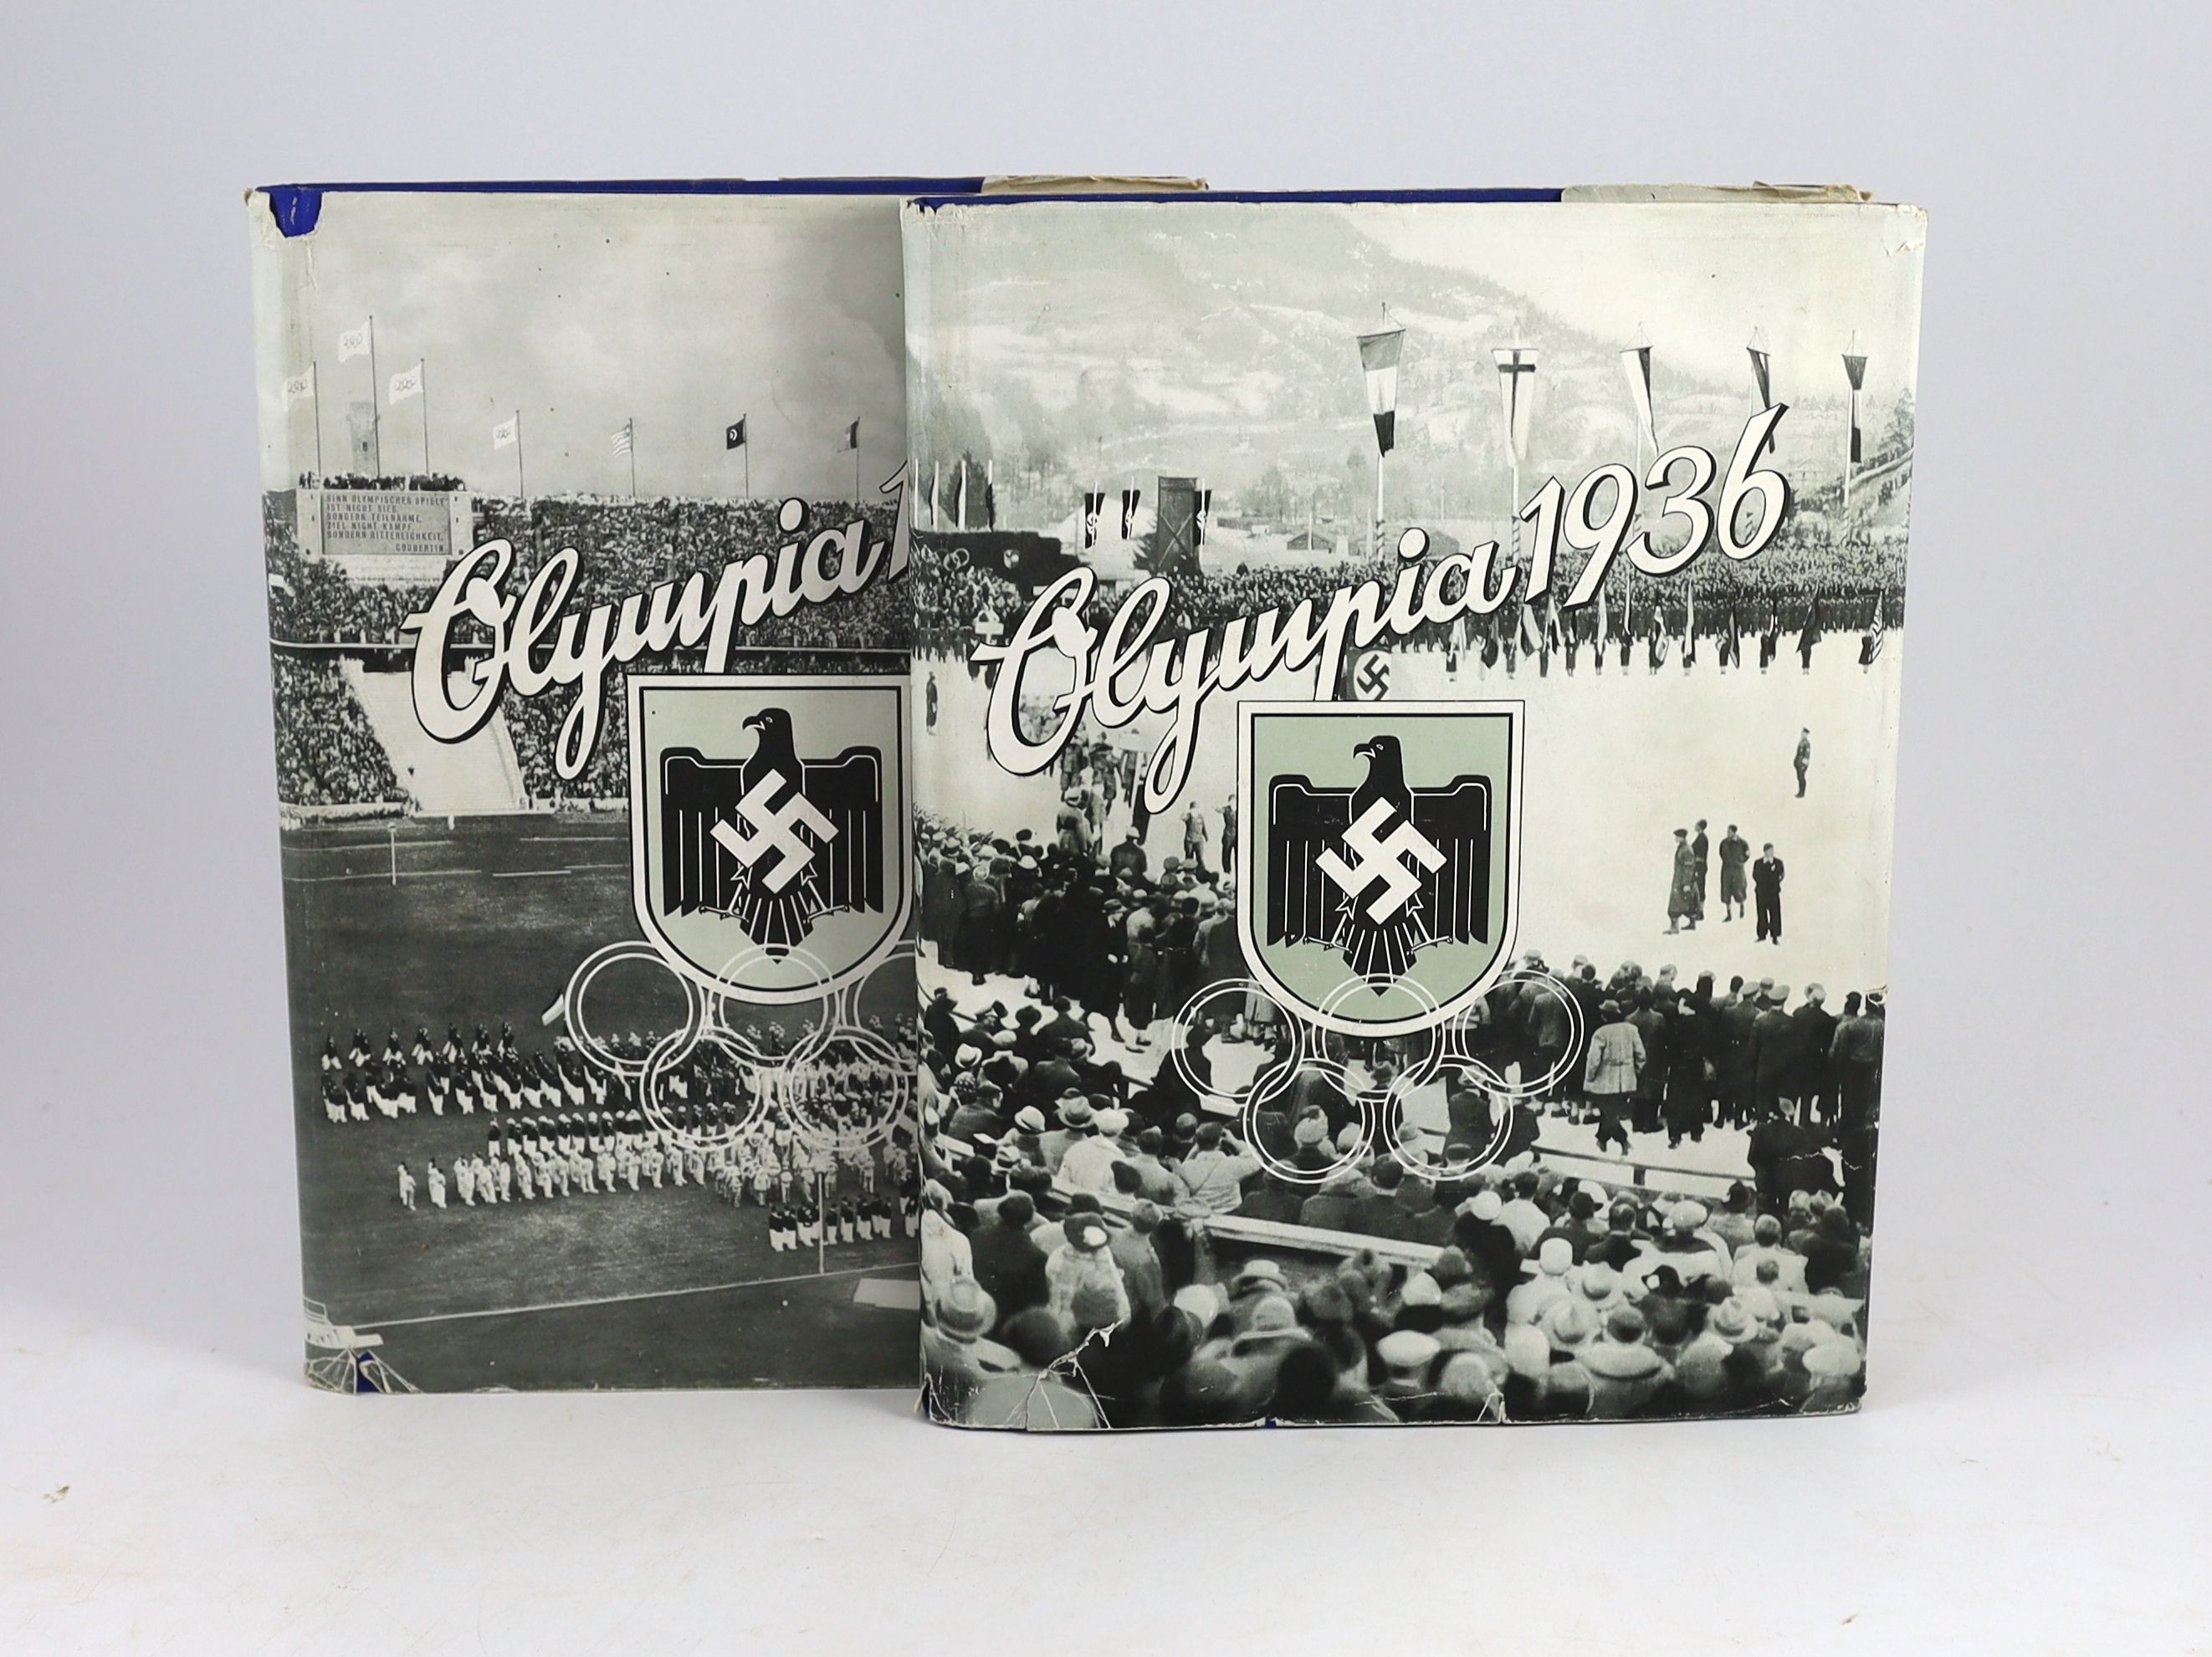 Anon - Die Olympischen Spiele 1936. 1st ed. 2. Vol. Complete with numerous illustrated plates and text illus. Original cloth with unclipped pictorial d/j. Folio. Cigaretten-Bilderdienst, Germany, 1936.